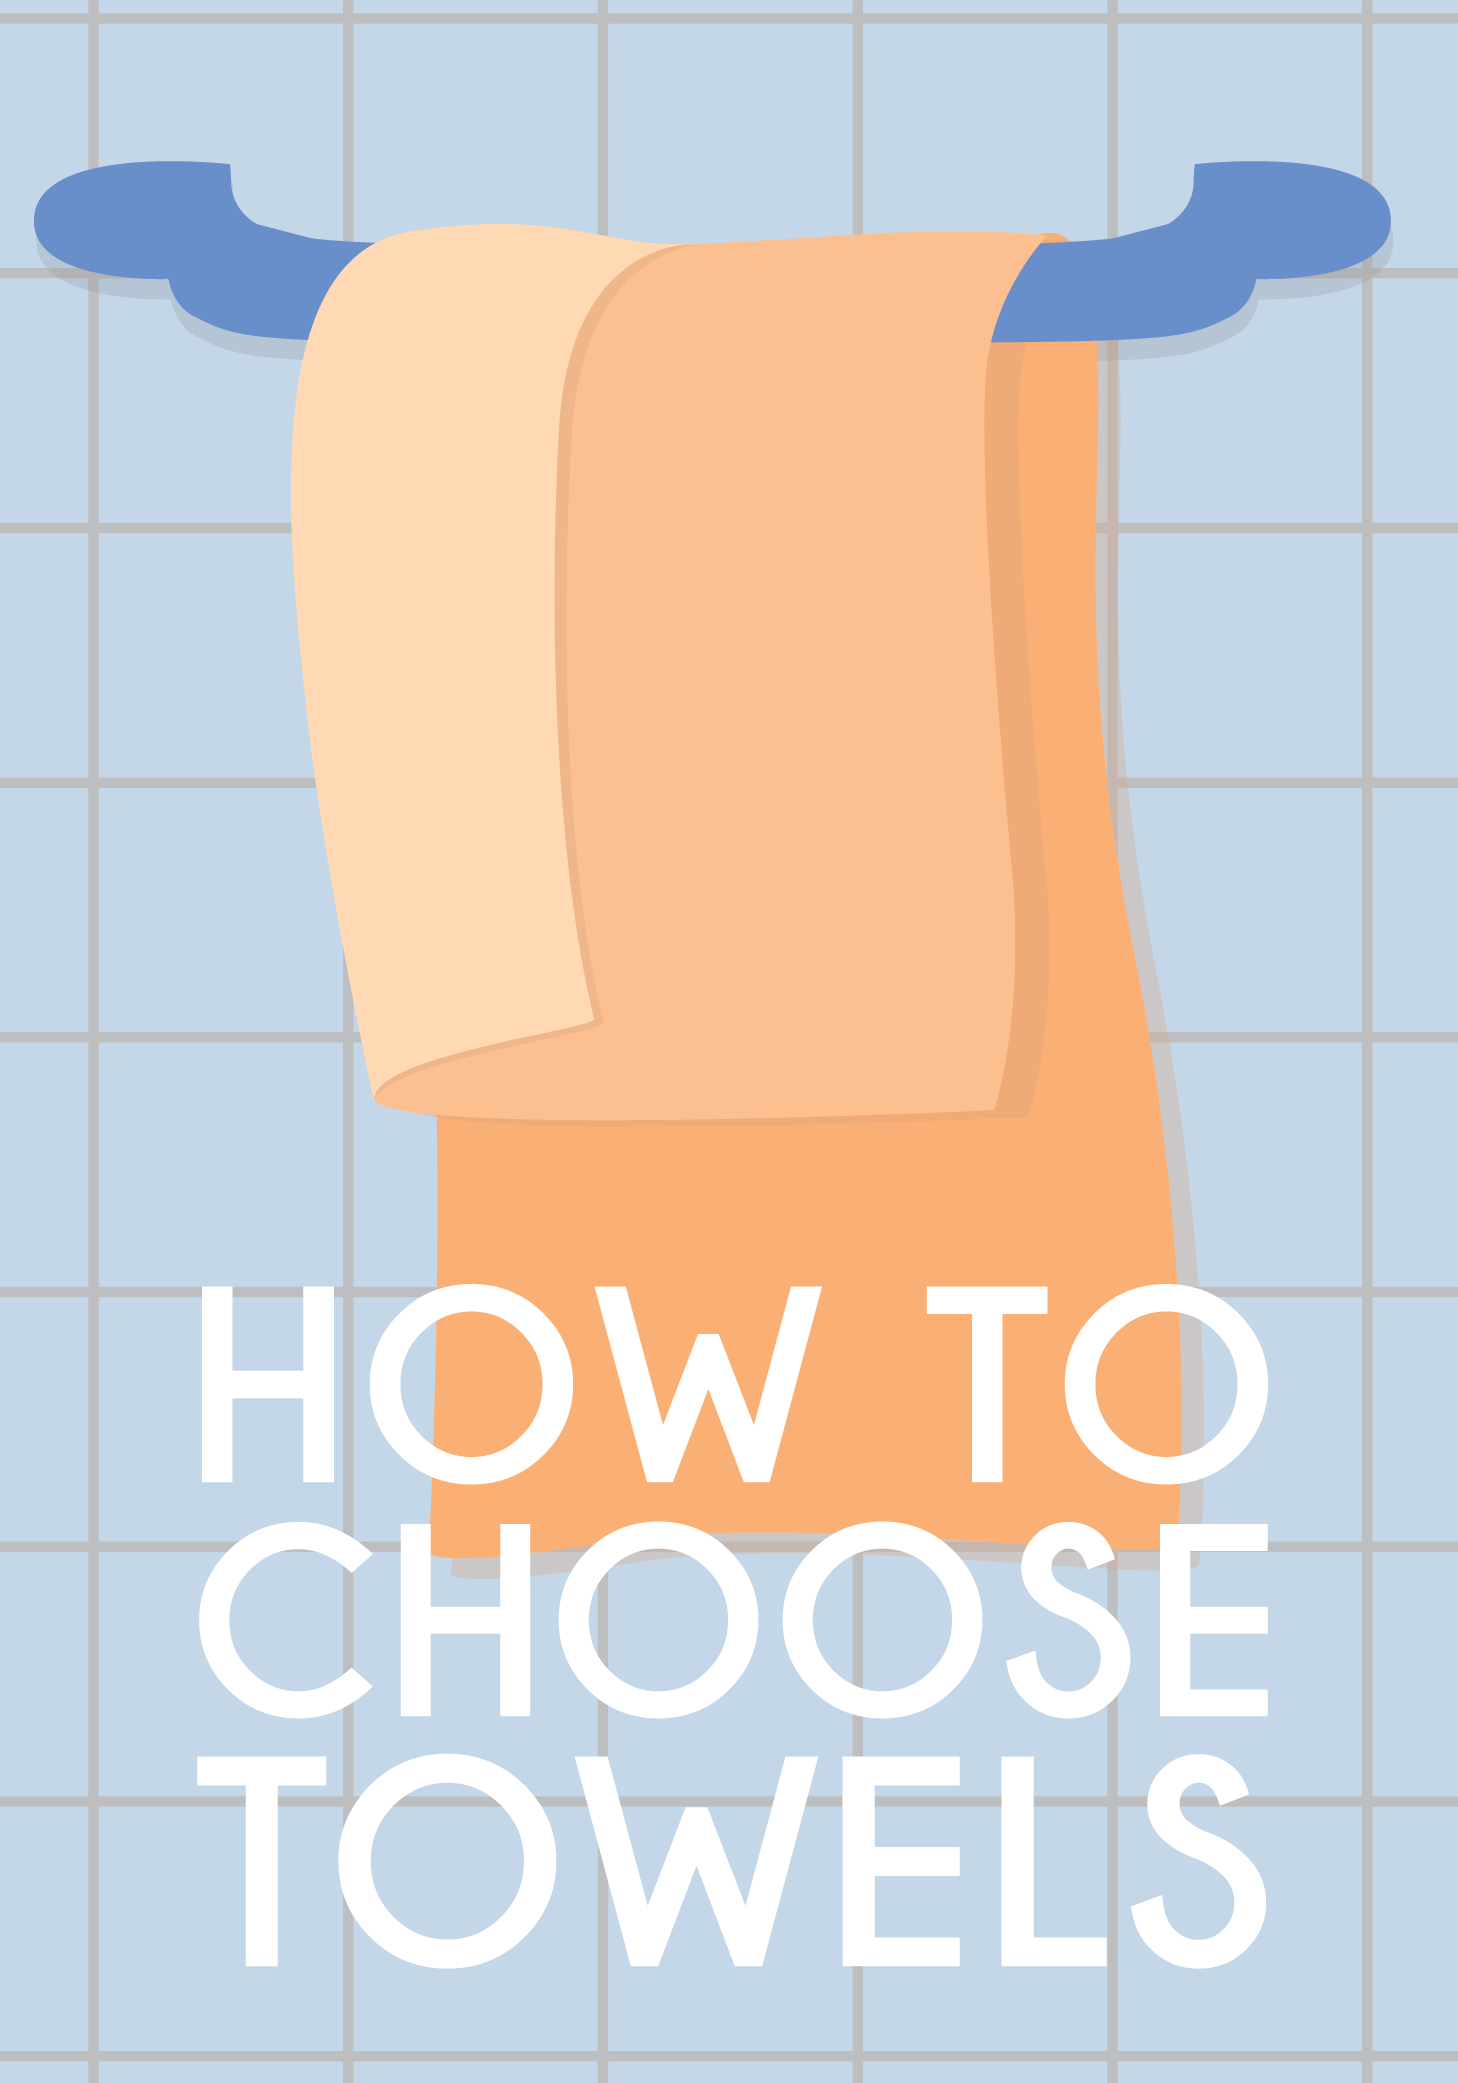 HOW TO CHOOSE TOWELS